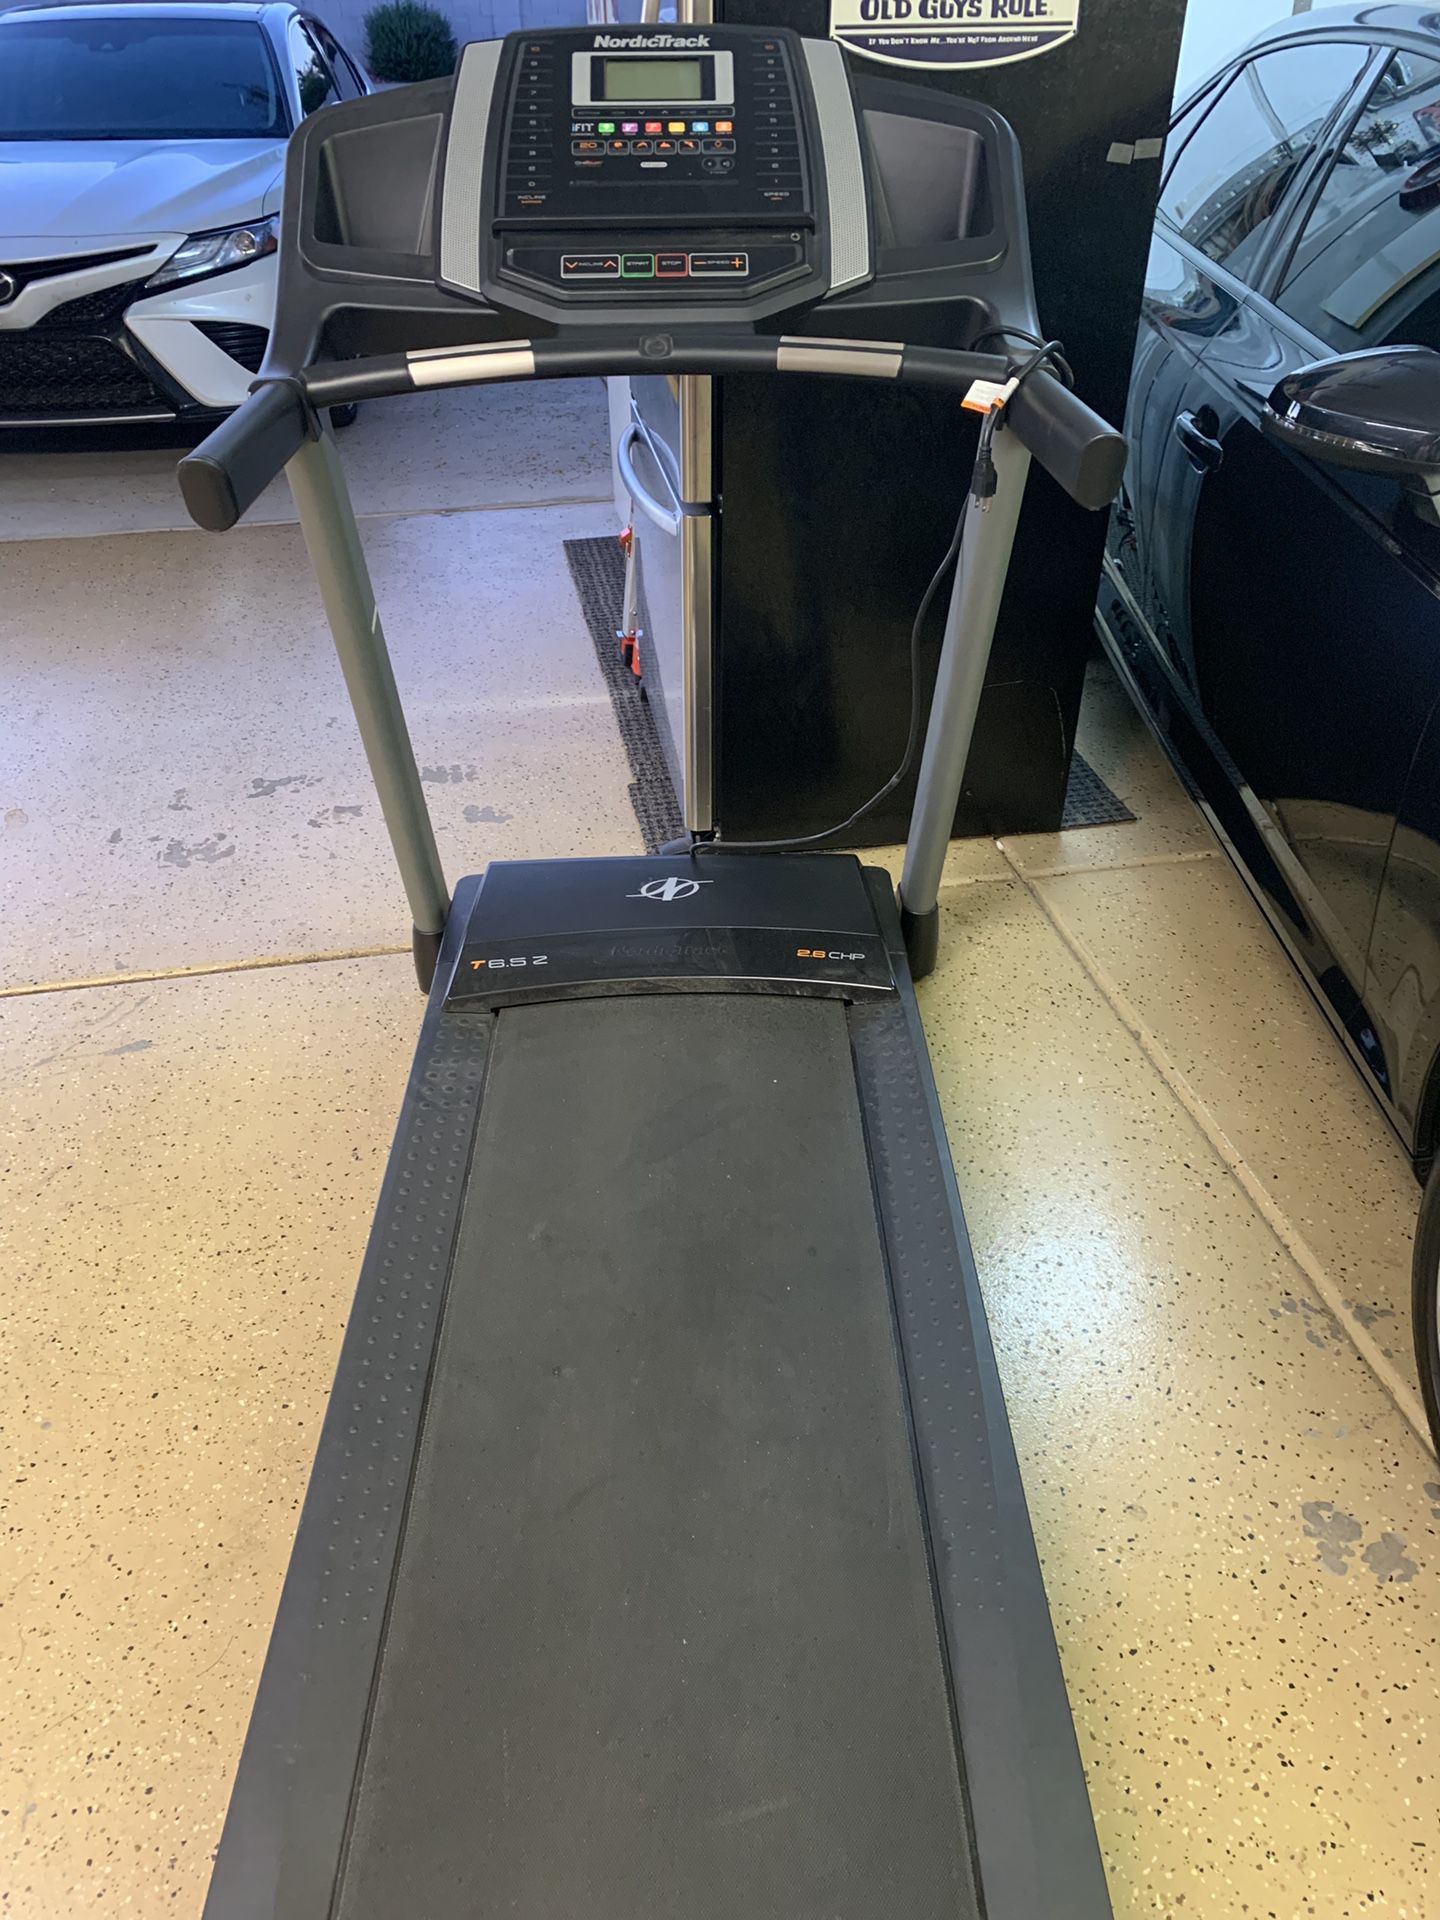 NordicTrack Treadmill T6.5z 2.8 CHP iFIT. Must sell